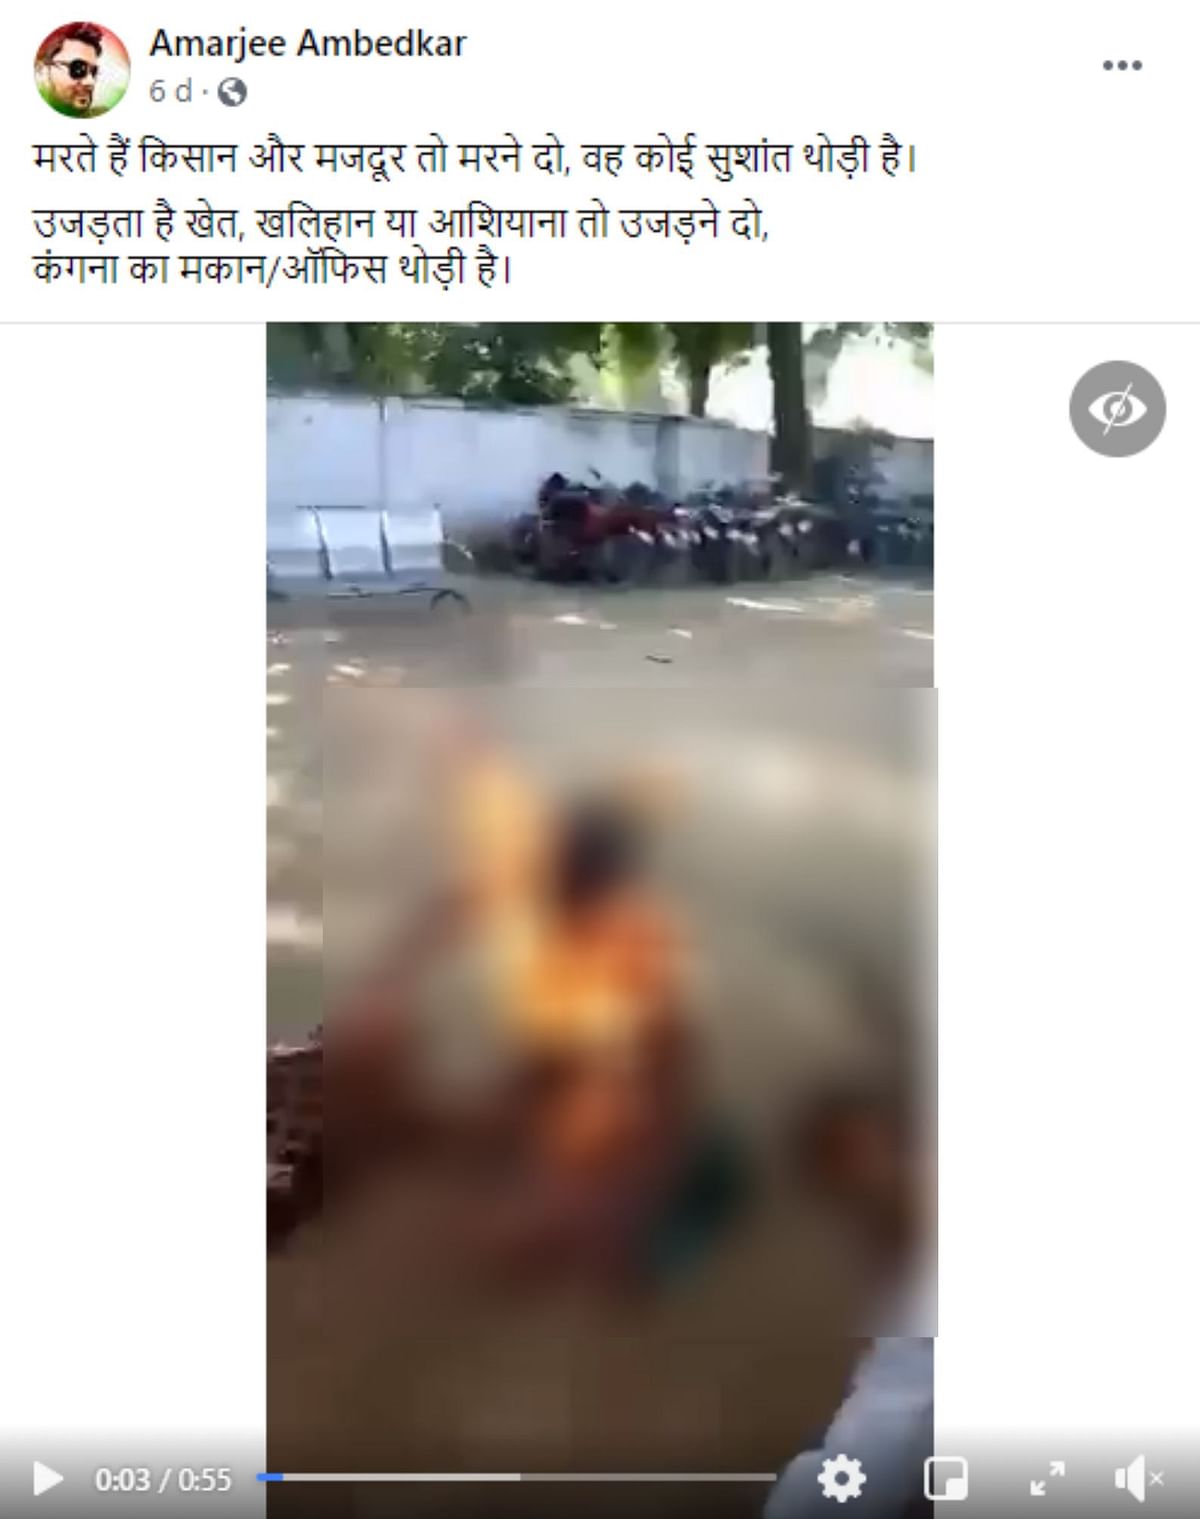 The video is actually from 2019, when a couple from UP’s Mathura had self-immolated to protest police inaction.